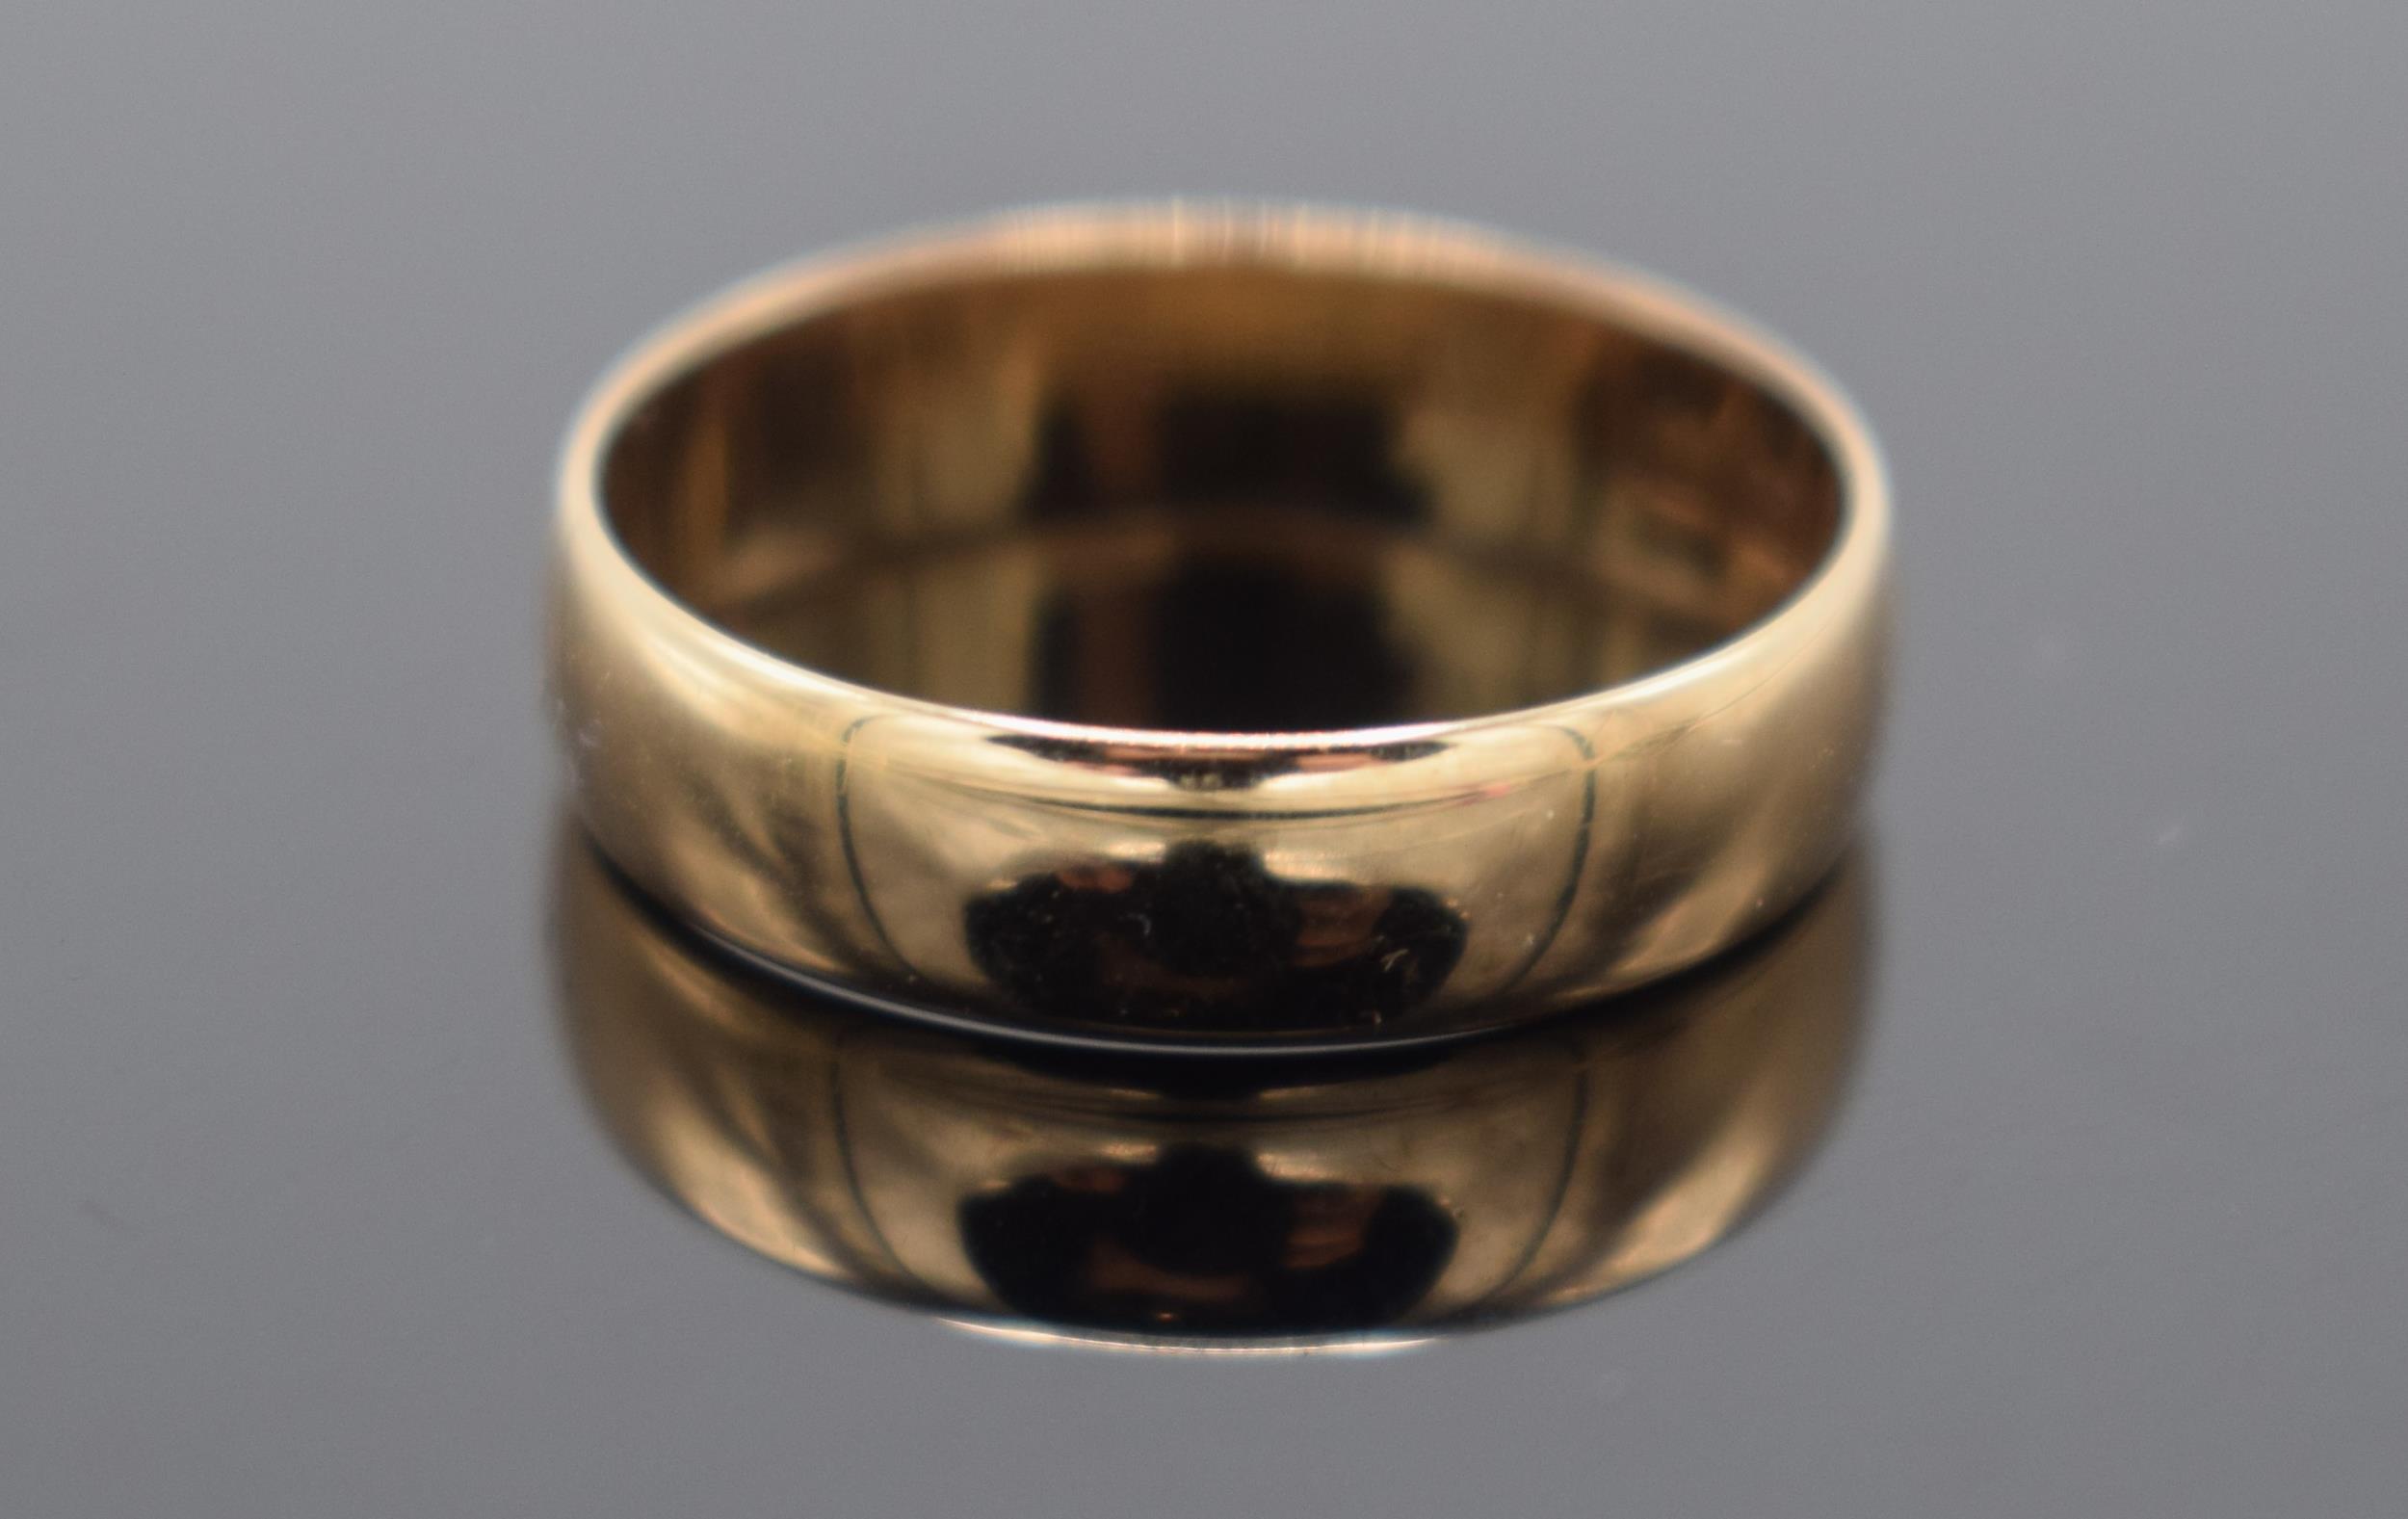 18ct gold wedding band, 2.1 grams, Birmingham 1860, size L, 4mm wide. - Image 2 of 3